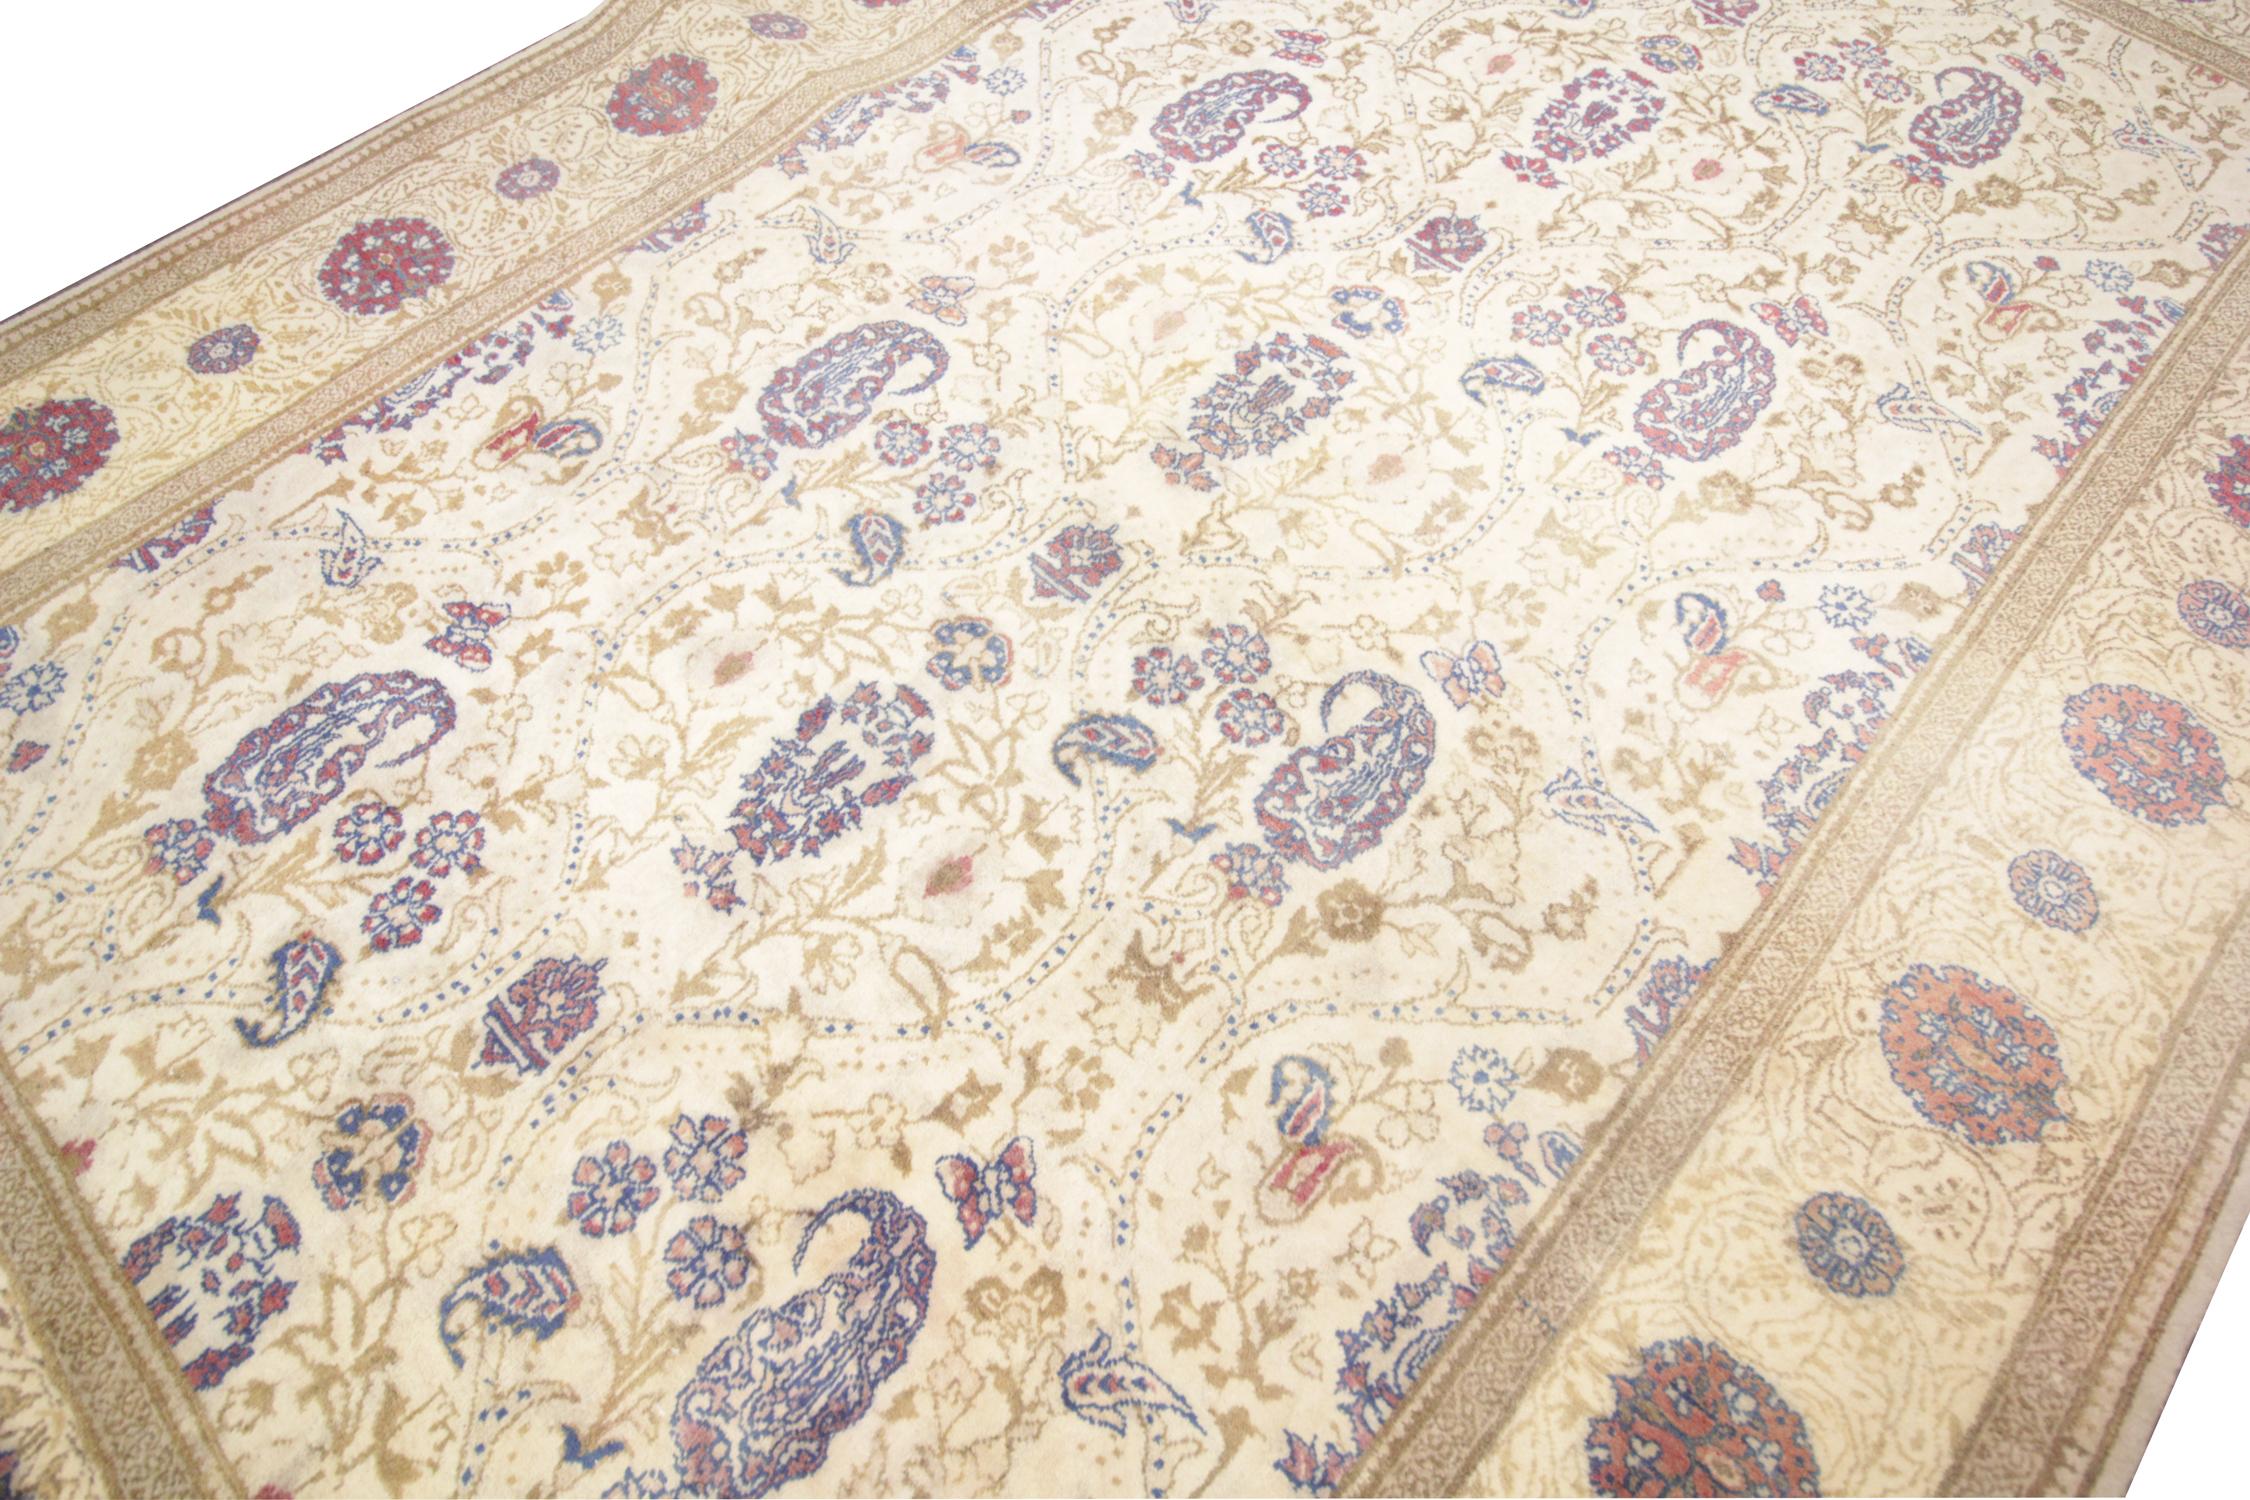 Beautifully handwoven patterns of floral and paisley designs sit on a background of cream and beige to create this stunning all-over design area rug. This vintage rug has been handmade carpet by Turkish artisans, made with handspun wool, which has